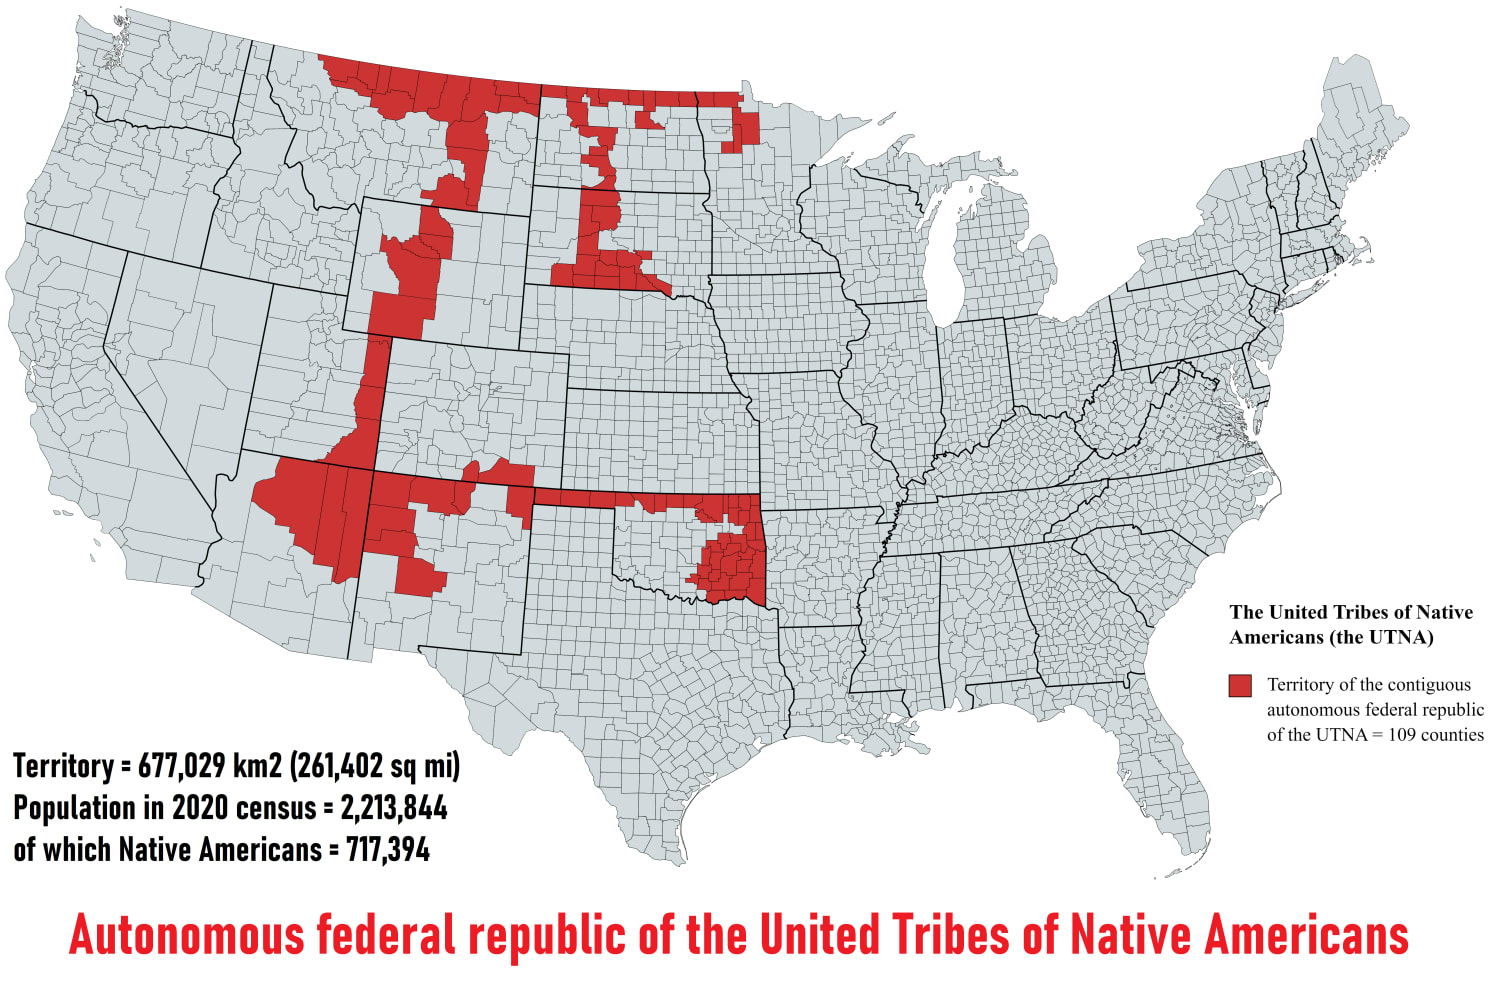 If Native American reservations were connected into one contiguous state: